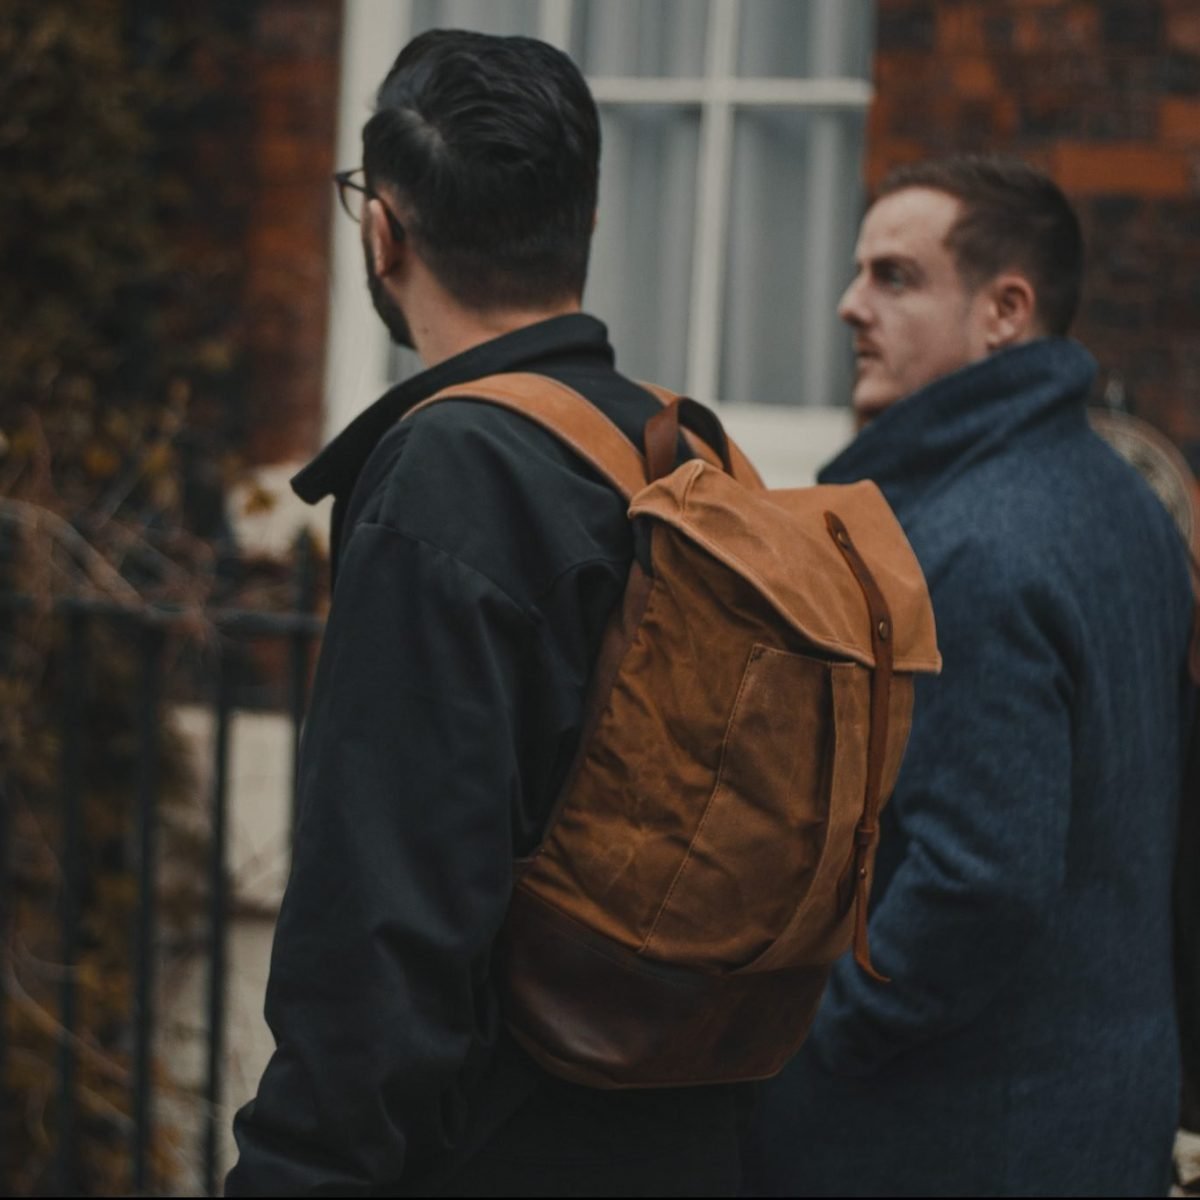 Waxed Cotton Canvas and Leather Backpack Rucksack - Menswear Denim Rugged Style Outfit - Waxed Canvas & Leather Backpacks by Oldfield - Jamie McIlhatton Warren Norton Wylde Coffee Liverpool Heswall